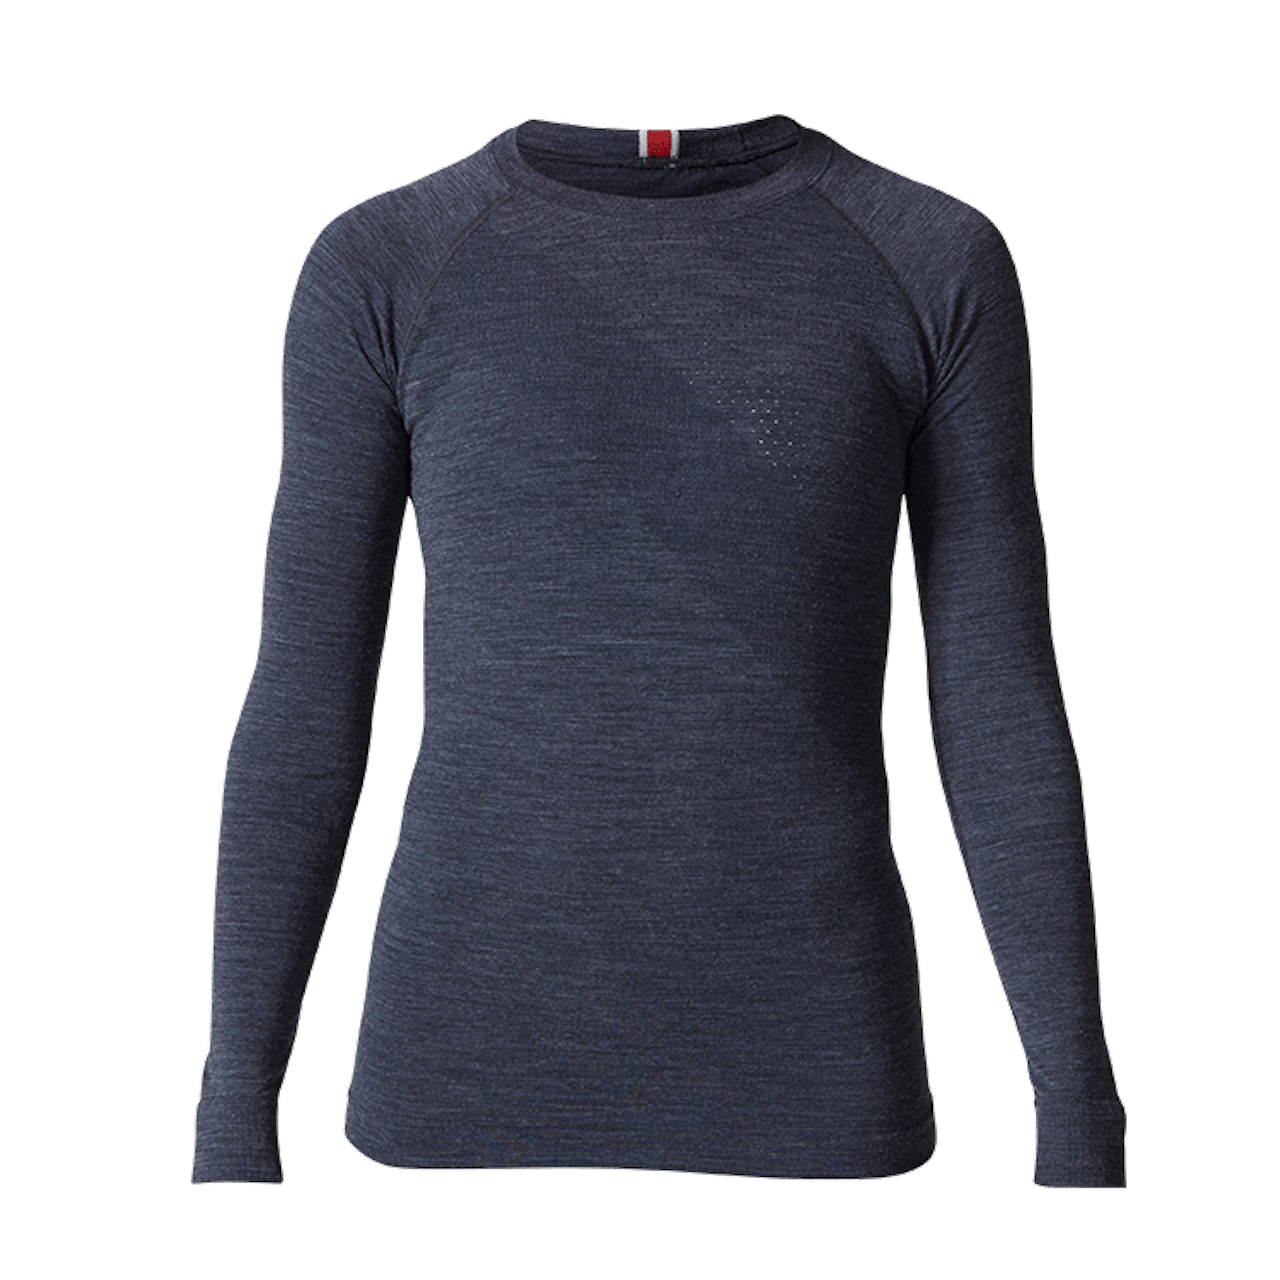 https://tracksmith-media.imgix.net/Womens-Fall_0004_Layer-Comp-5_4a5a14f1-3028-4cc5-9696-8e80ac3e15af.png?auto=format,compress&crop=faces&dpr=2&fit=crop&h=640&w=640